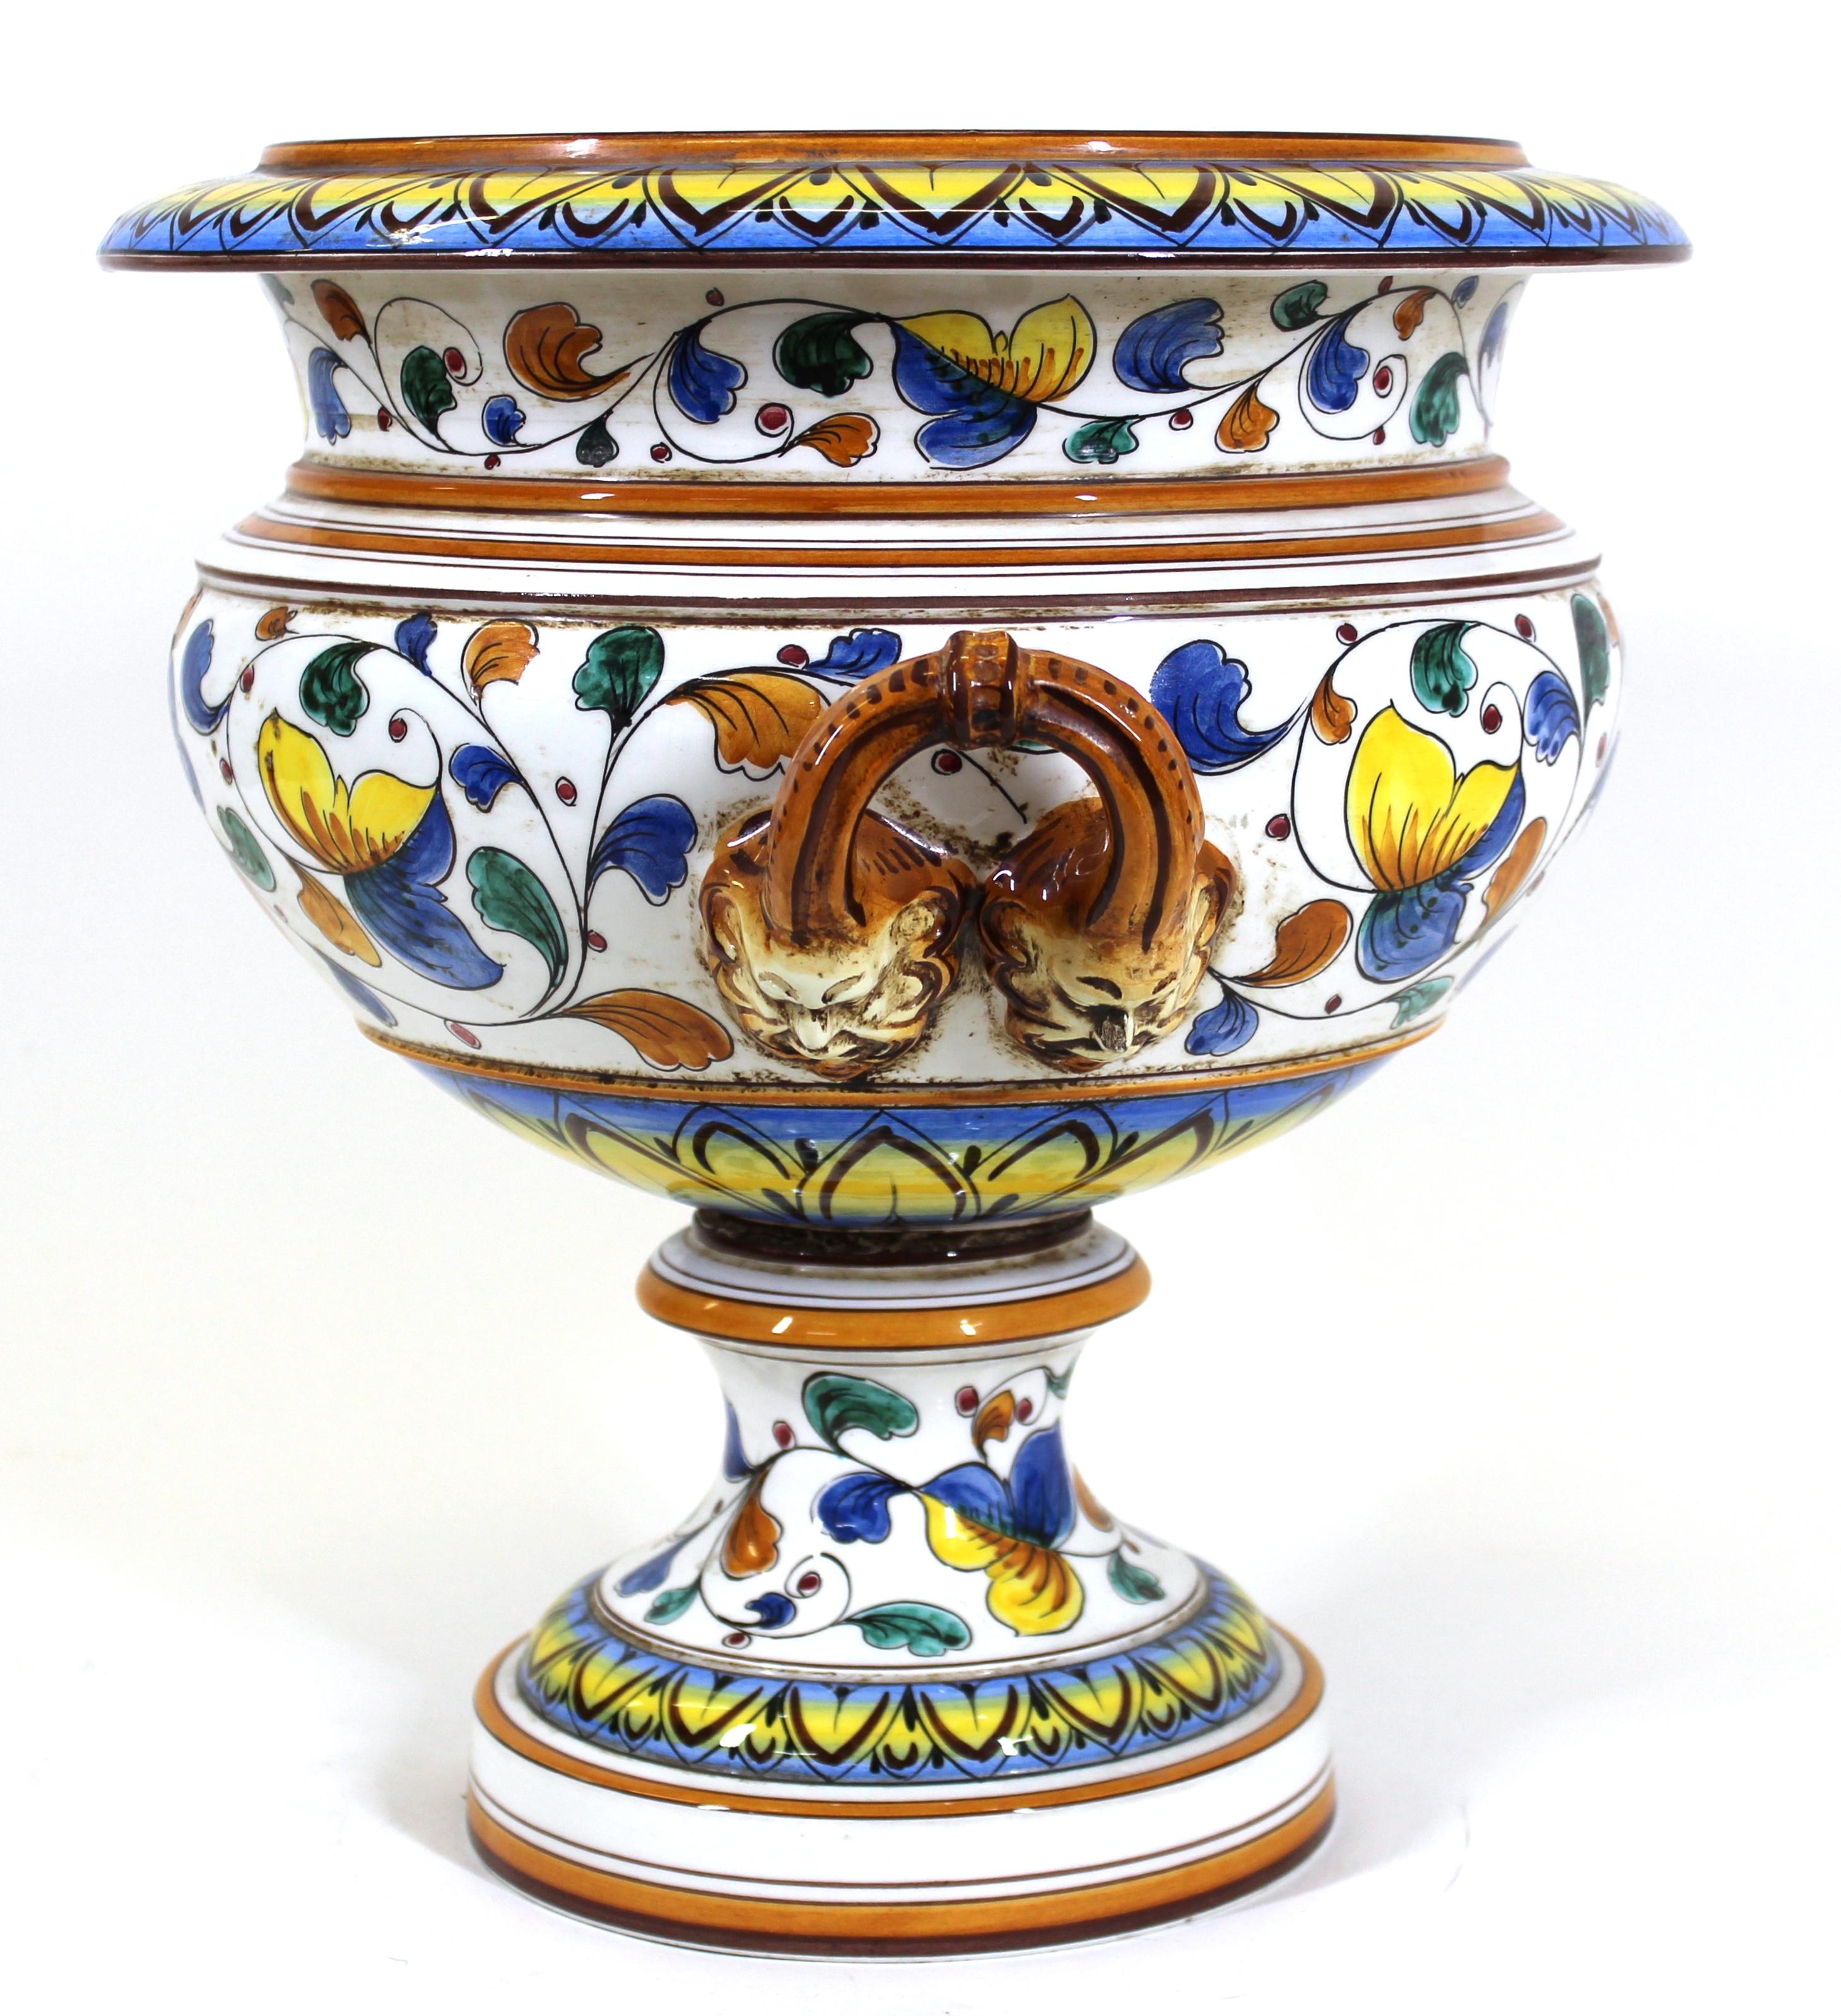 Italian Baroque style hand painted ceramic Medici vase, made in Italy for Richard Ginori, marked on the inside.